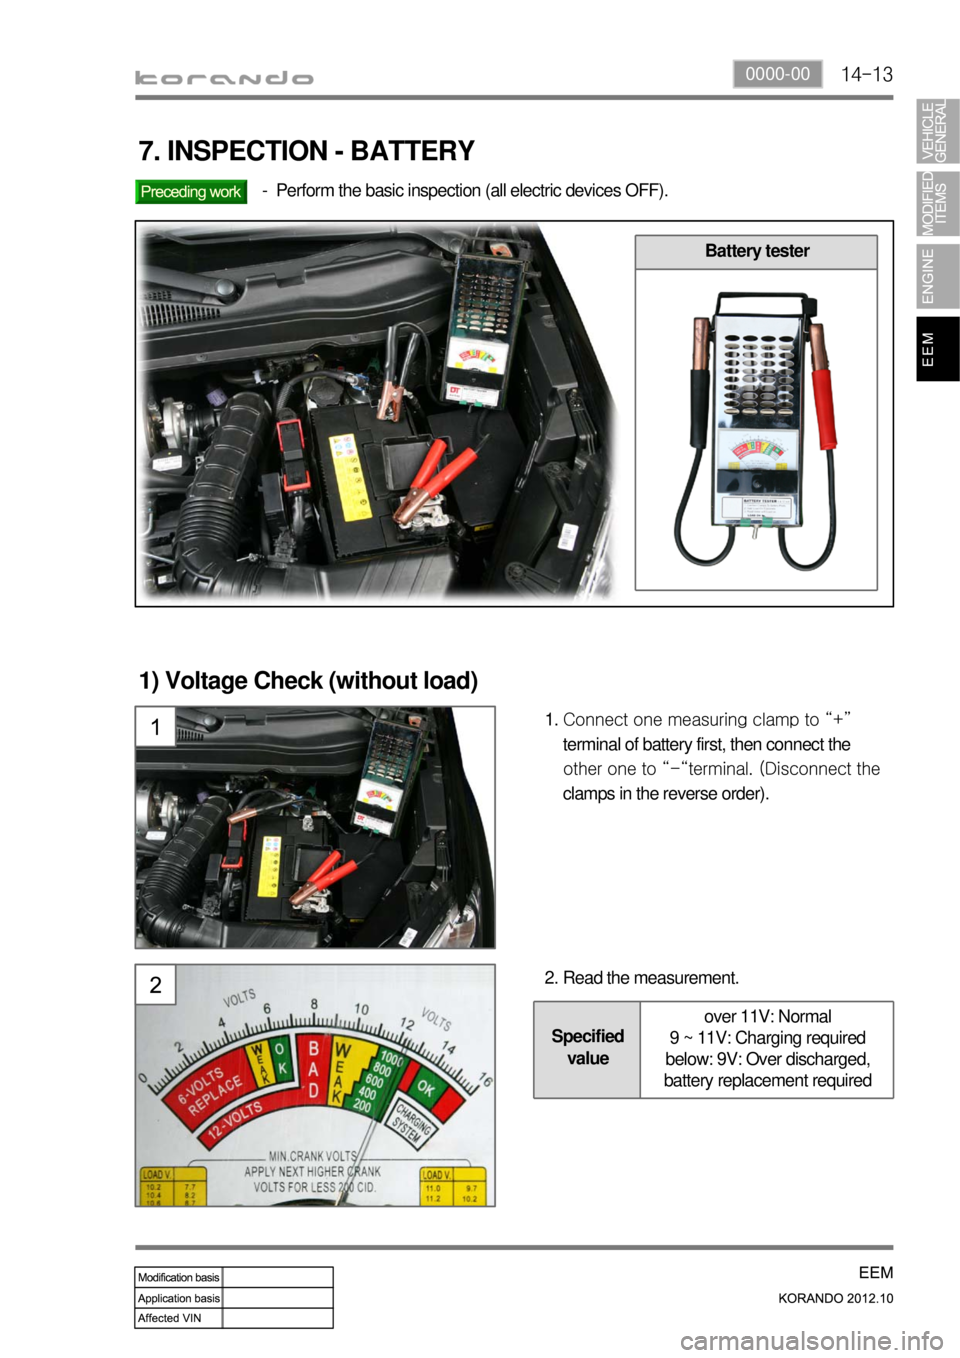 SSANGYONG KORANDO 2012  Service Manual 14-130000-00
Specified 
valueover 11V: Normal
9 ~ 11V: Charging required
below: 9V: Over discharged, 
battery replacement required
7. INSPECTION - BATTERY
Perform the basic inspection (all electric de